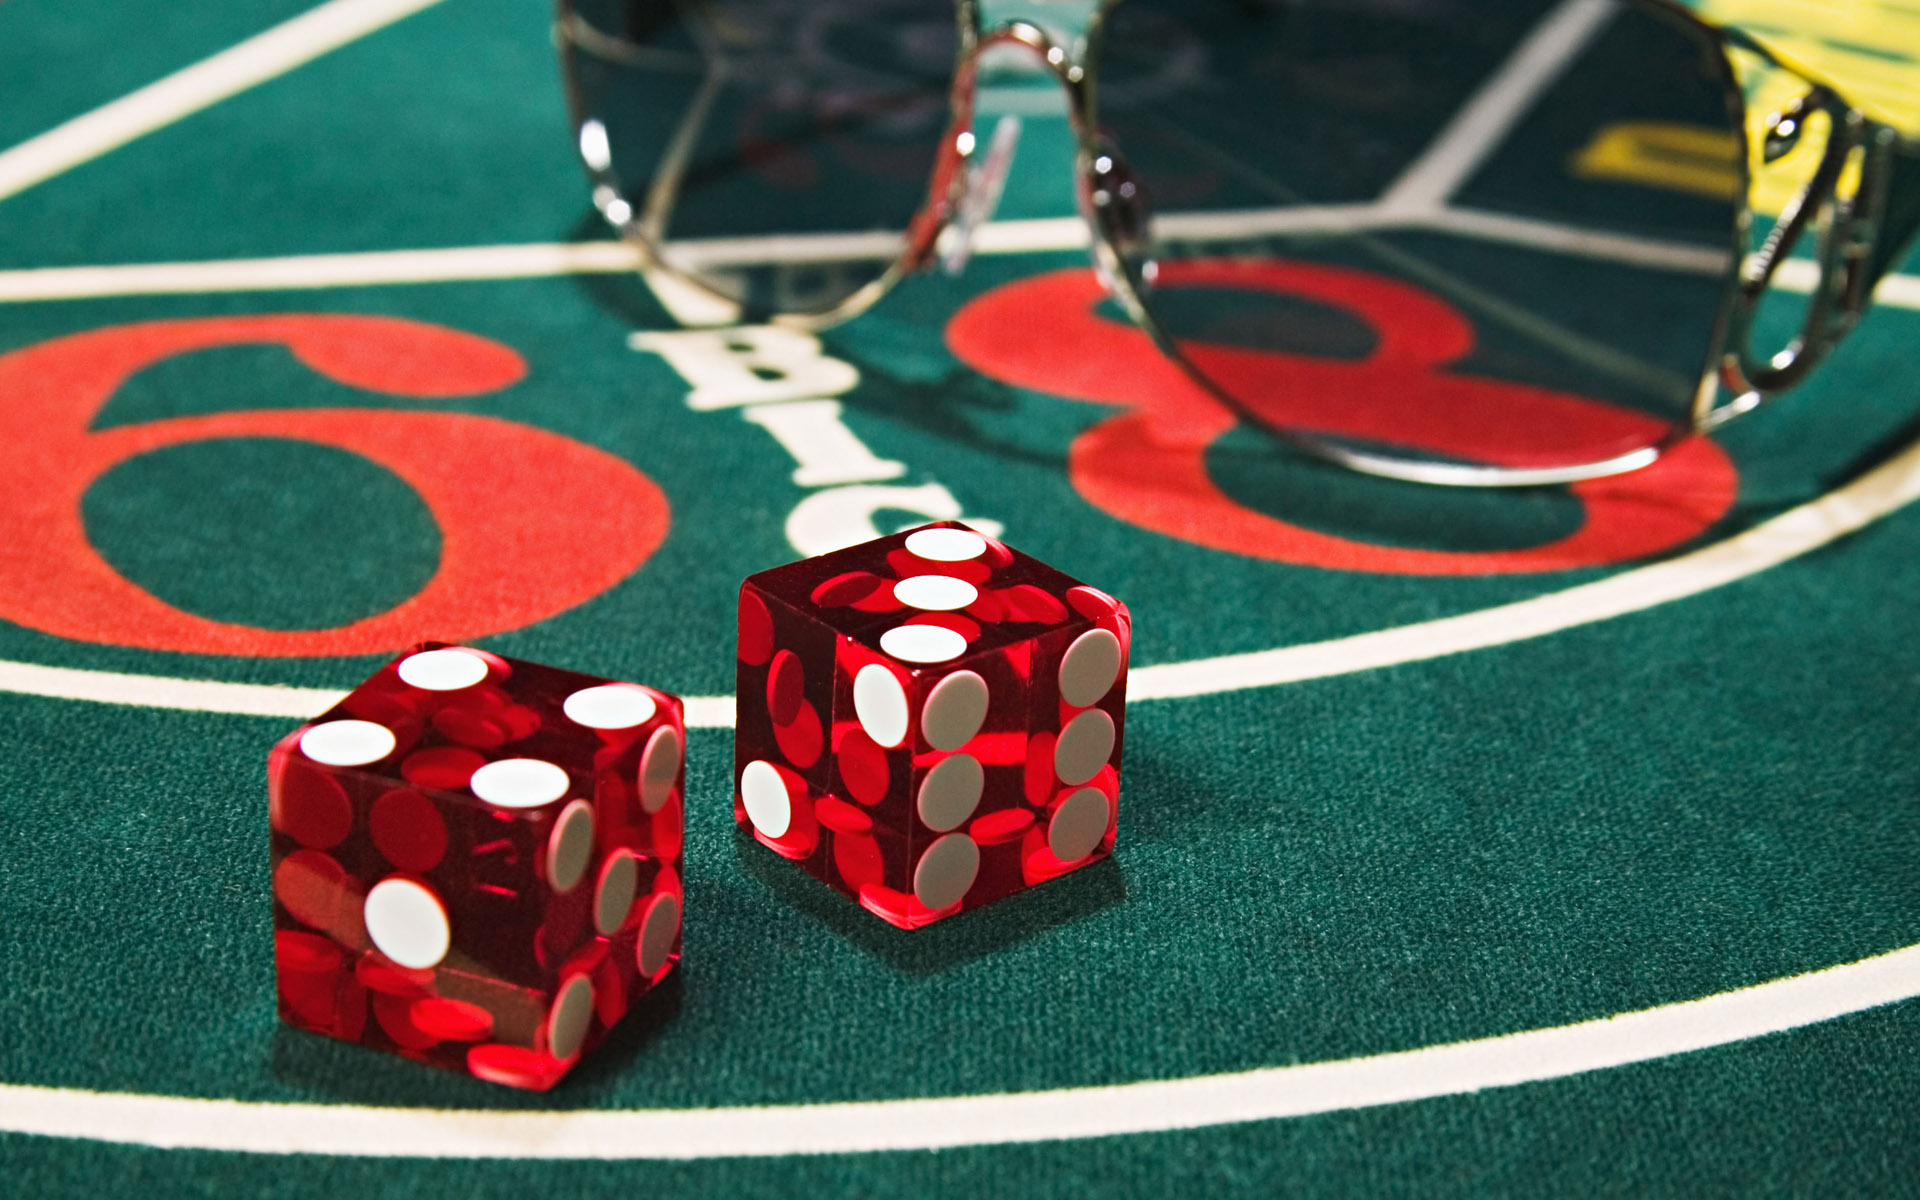 Cheating at craps: how to win without being spotted?